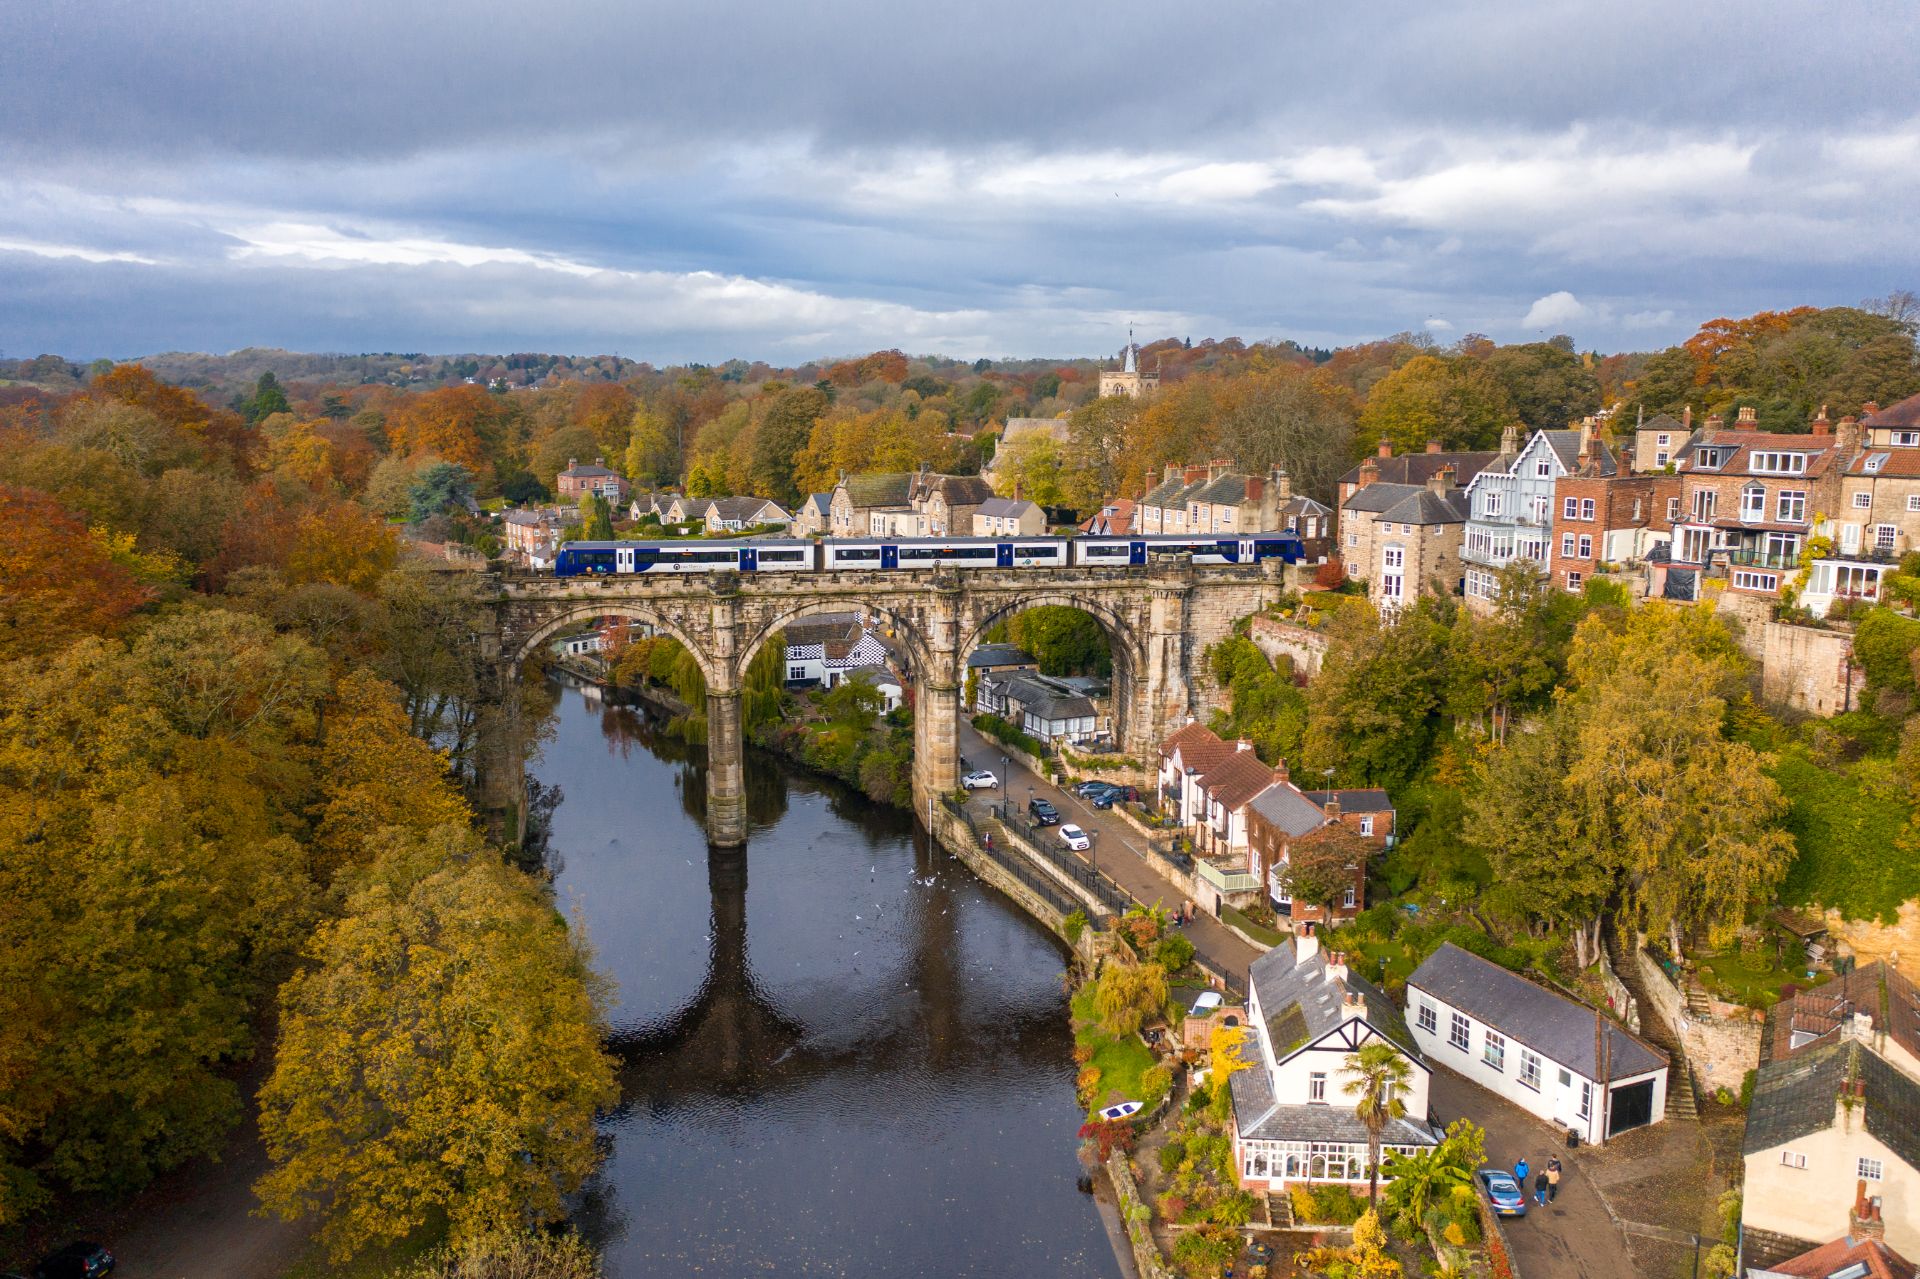 viaduct-running-through-cute-historic-town-over-the-river-on-an-autumn-day-knaresborough-england-uk-day-trips-from-leeds